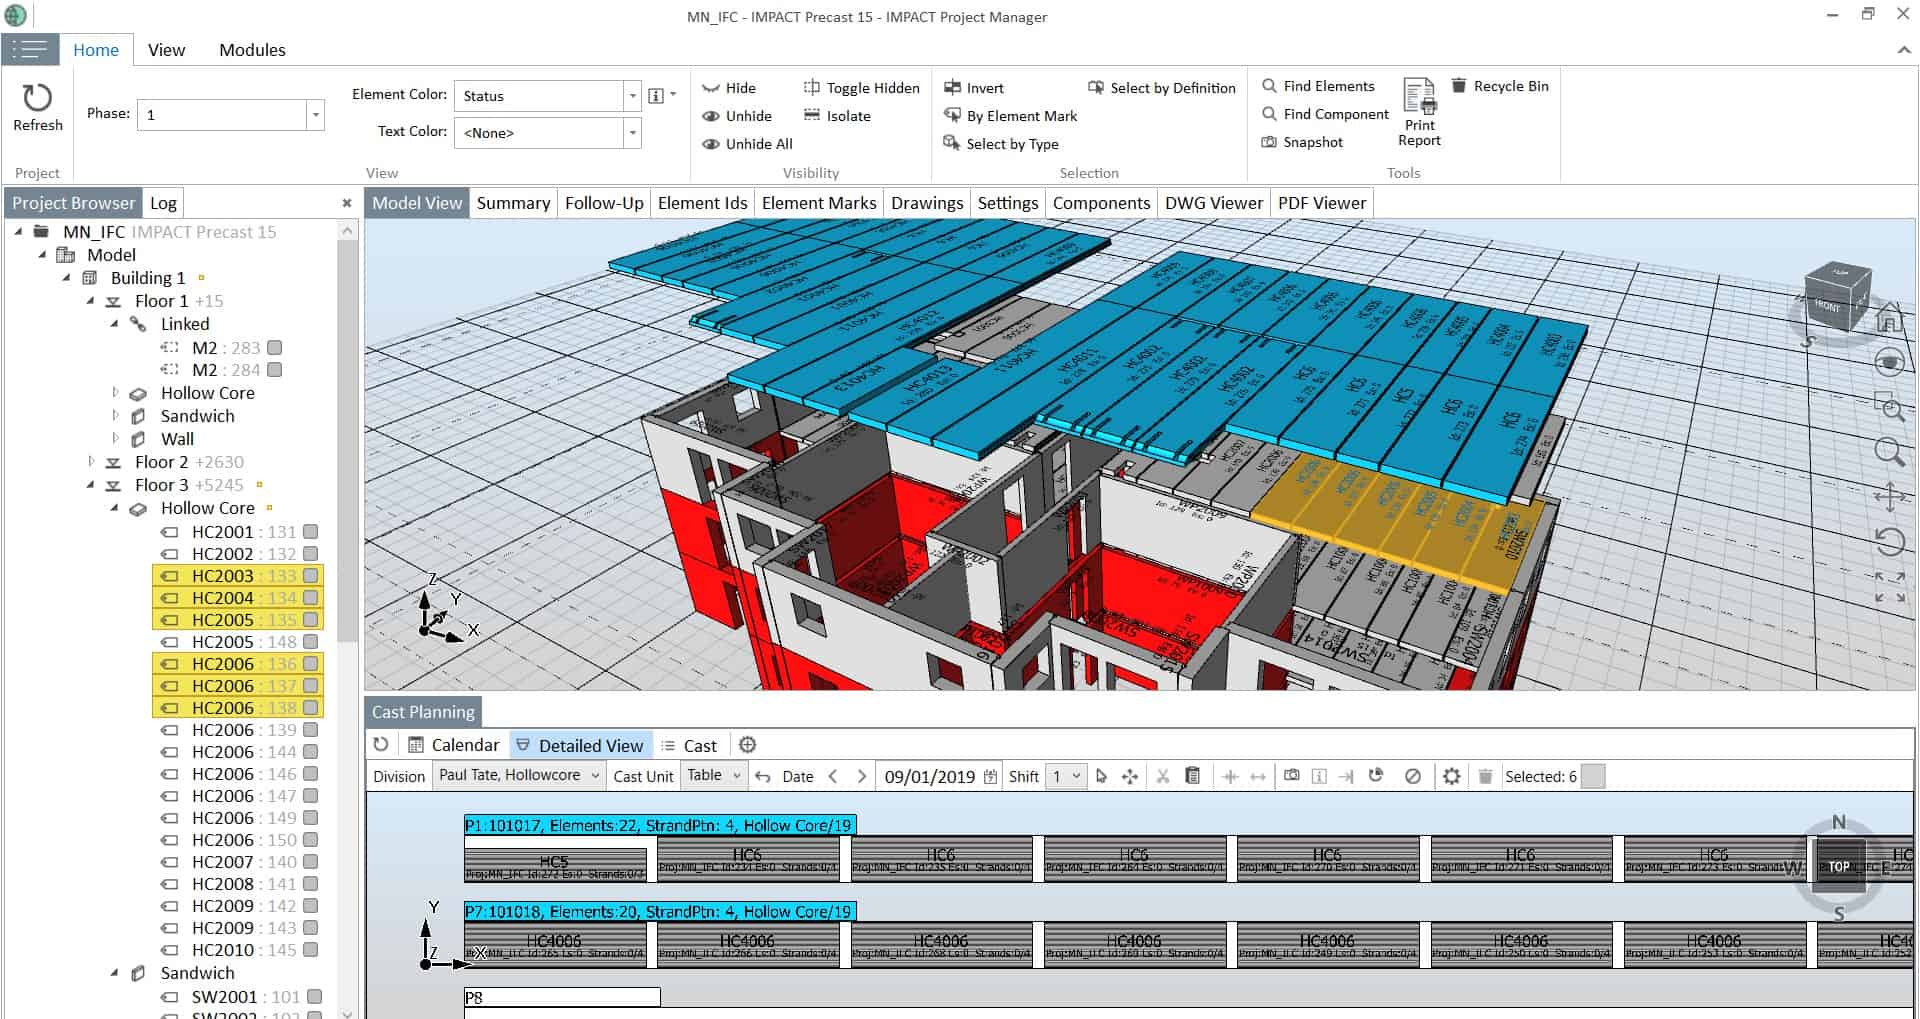 IMPACT Precast Production Planning in full 3D